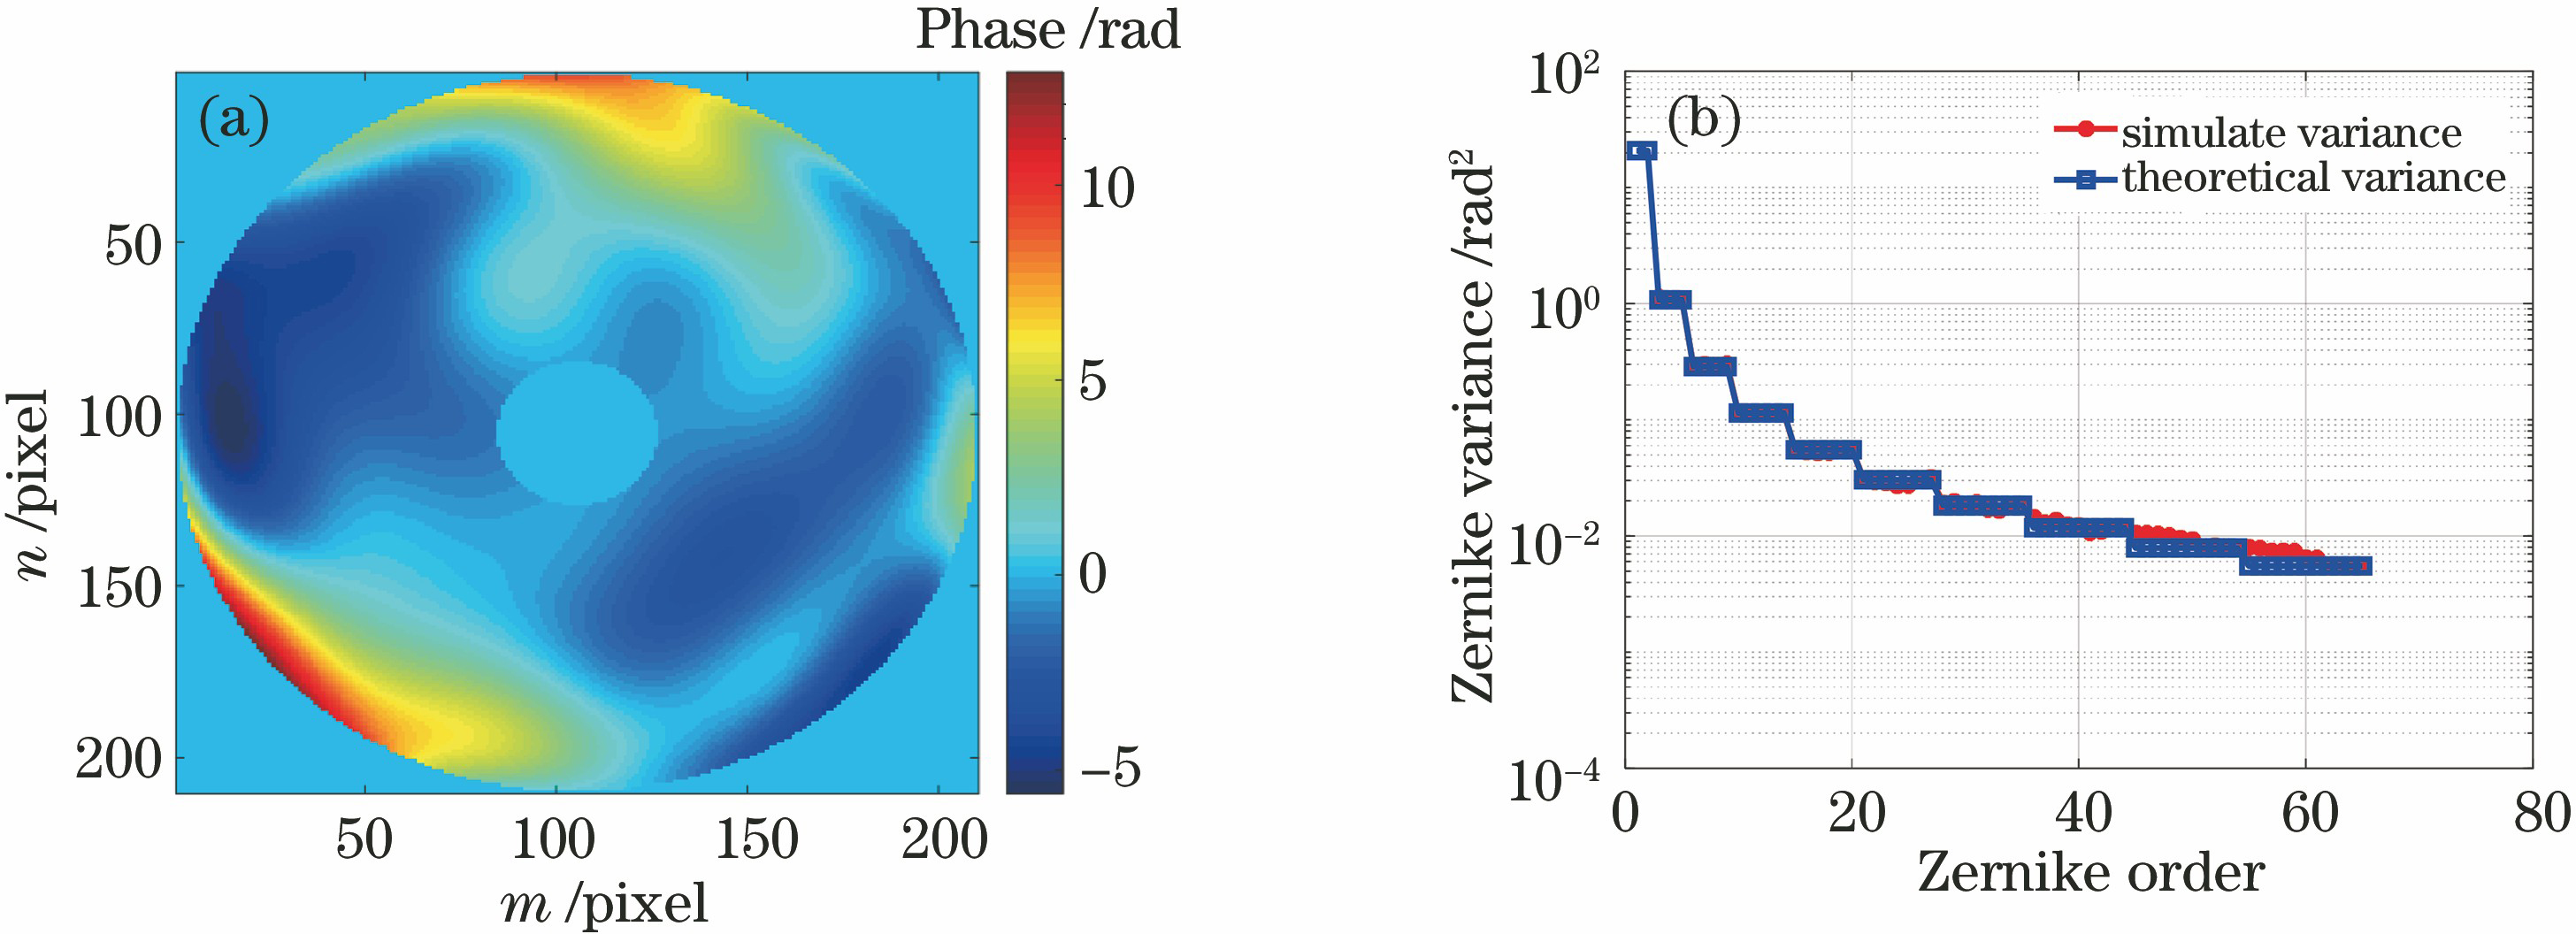 Simulation and verification of random distorted wavefront phase different of atmospheric turbulence. (a) Typical simulated wavefront phase; (b) theoretical and simulation values of Zernike coefficient variance